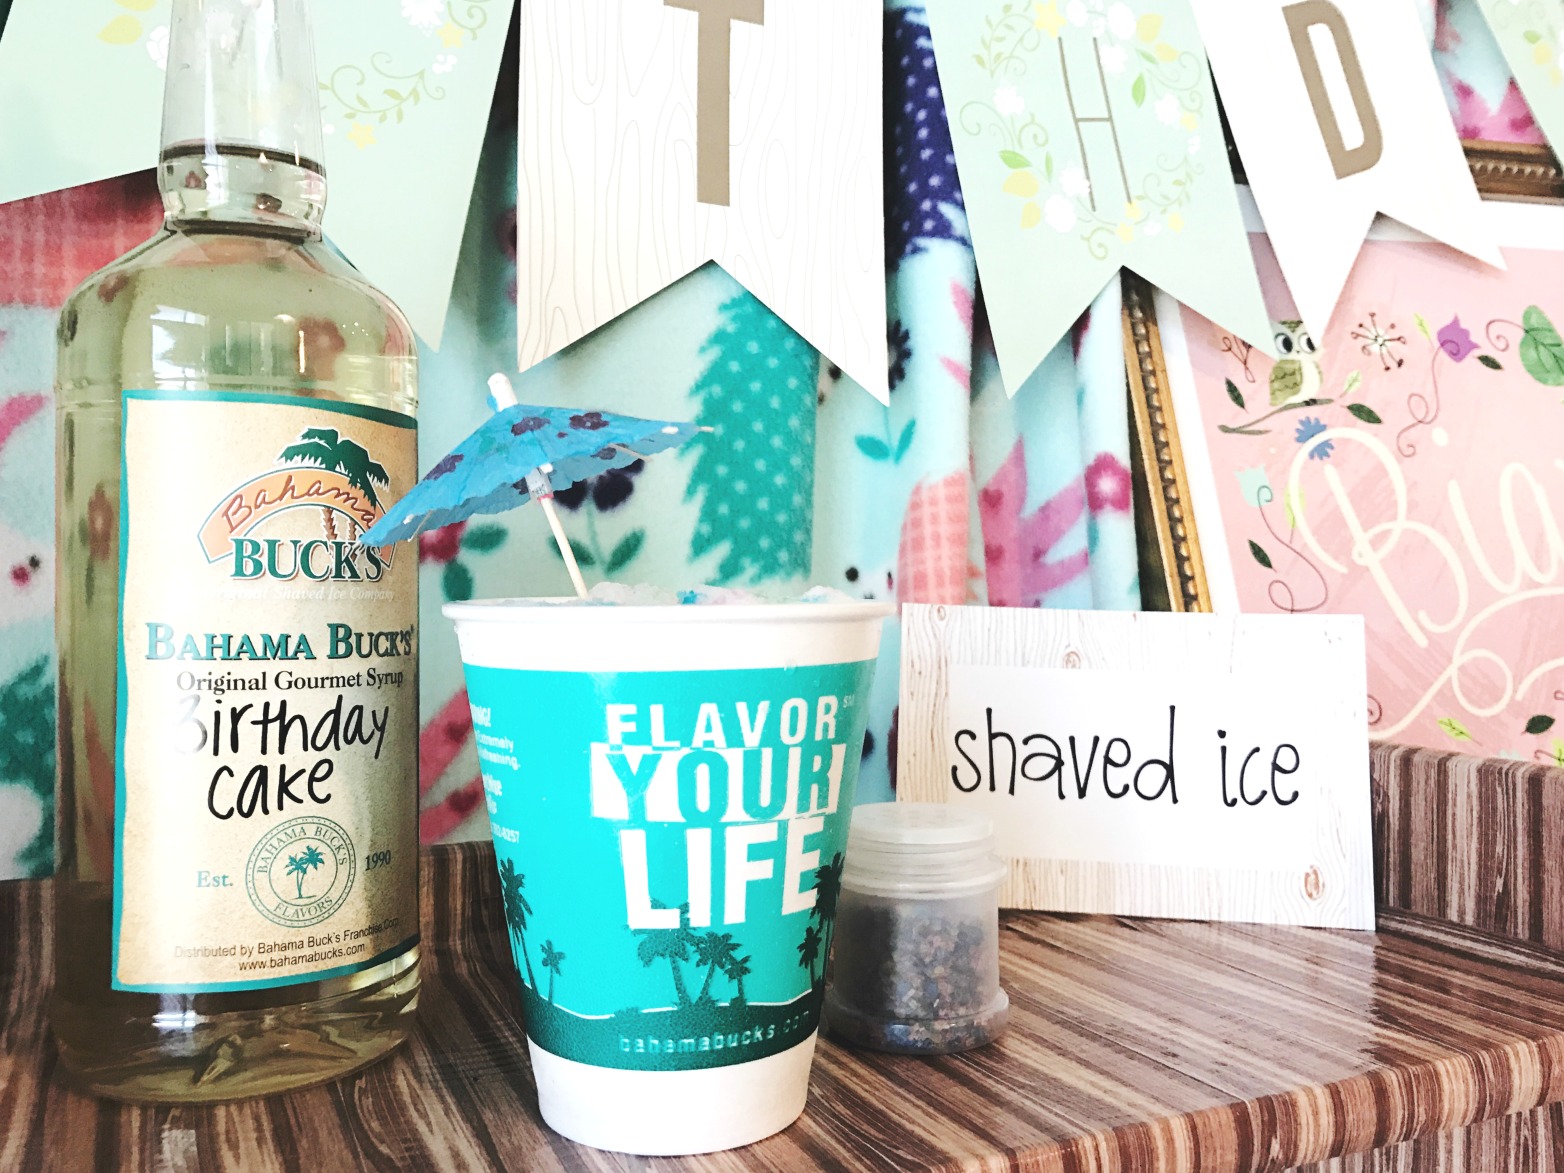 Celebrate at your next birthday party with a Bahama Buck's shaved ice party pack instead of cake!